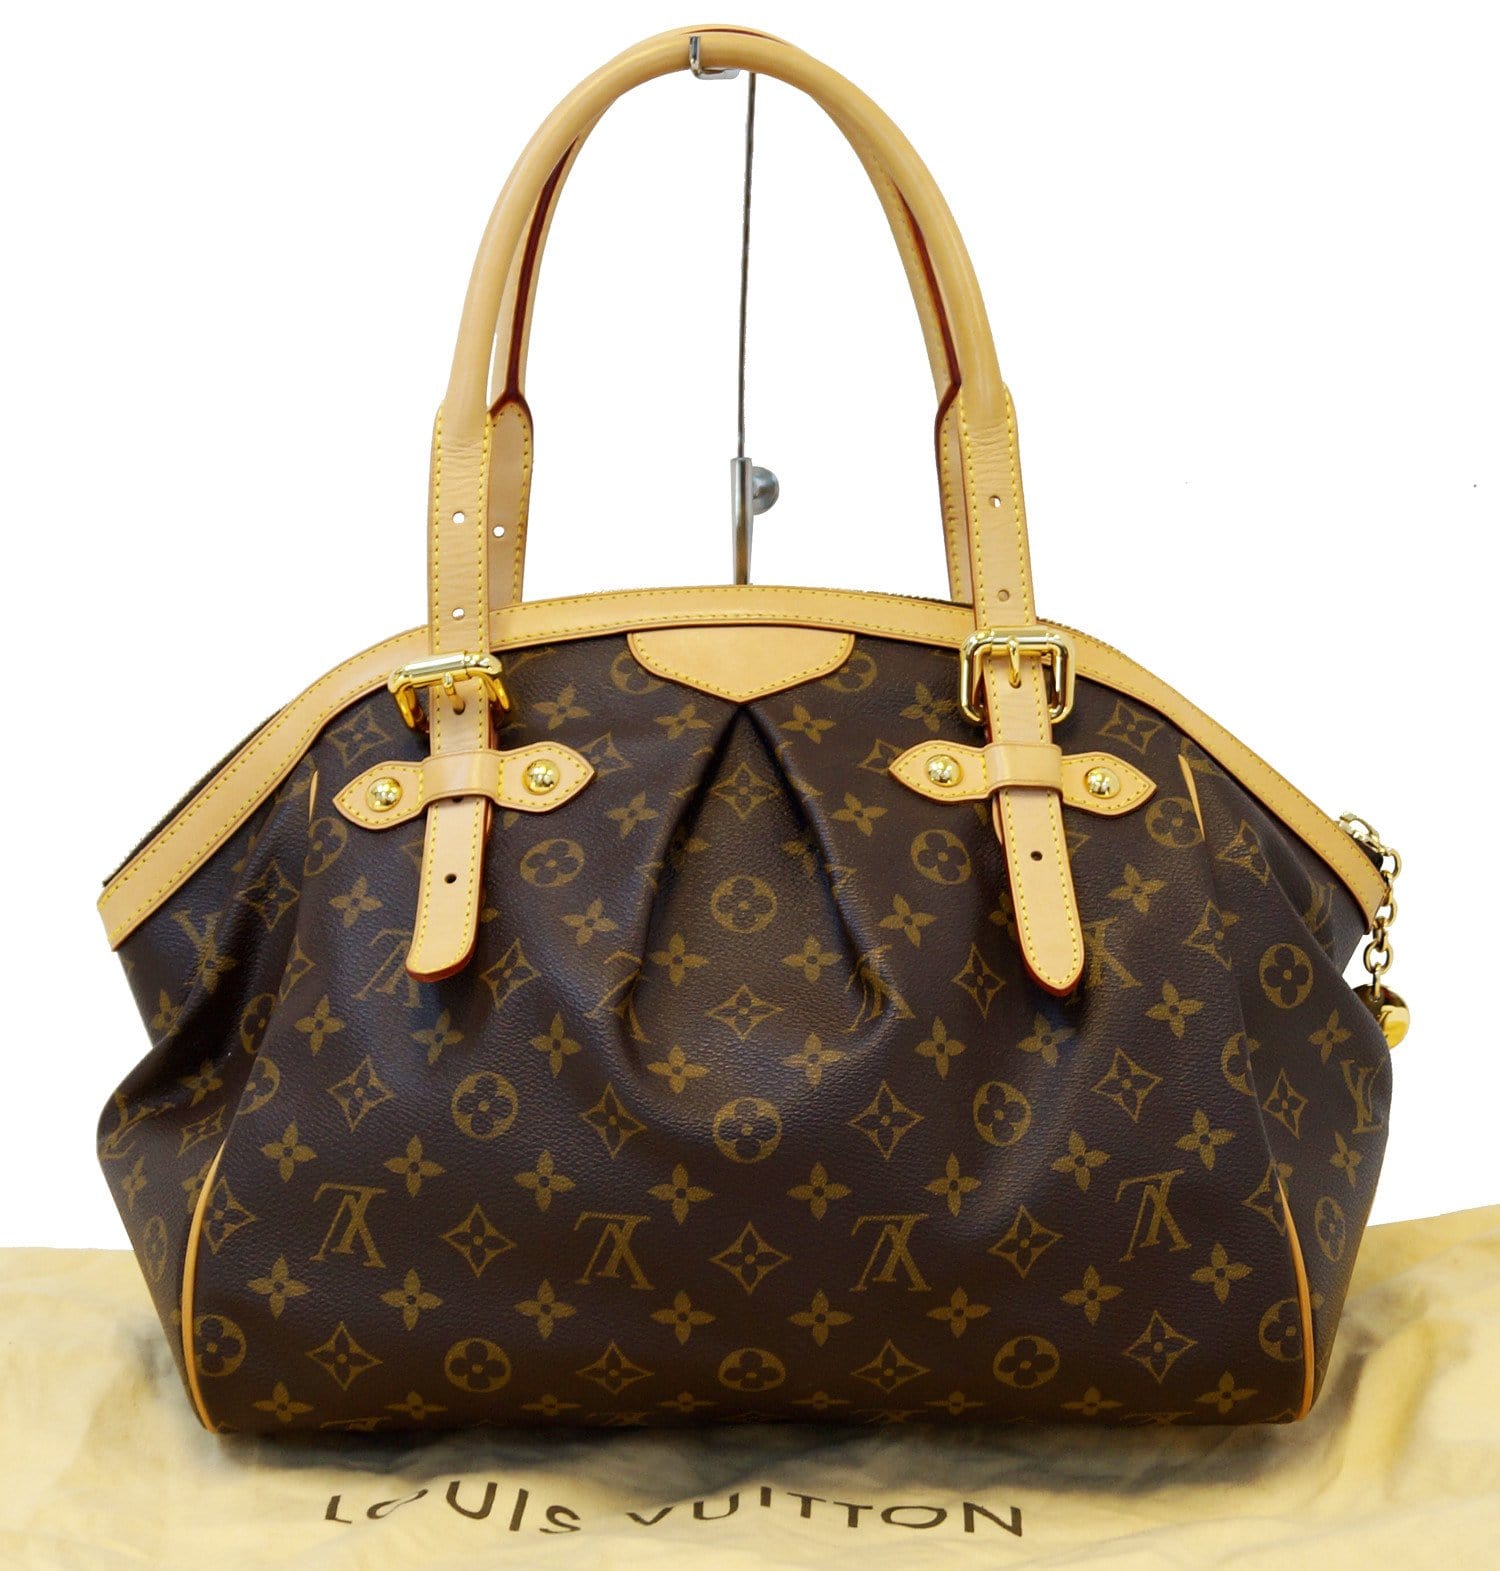 How to Tell if a Louis Vuitton Tivoli GM is Fake or Authentic